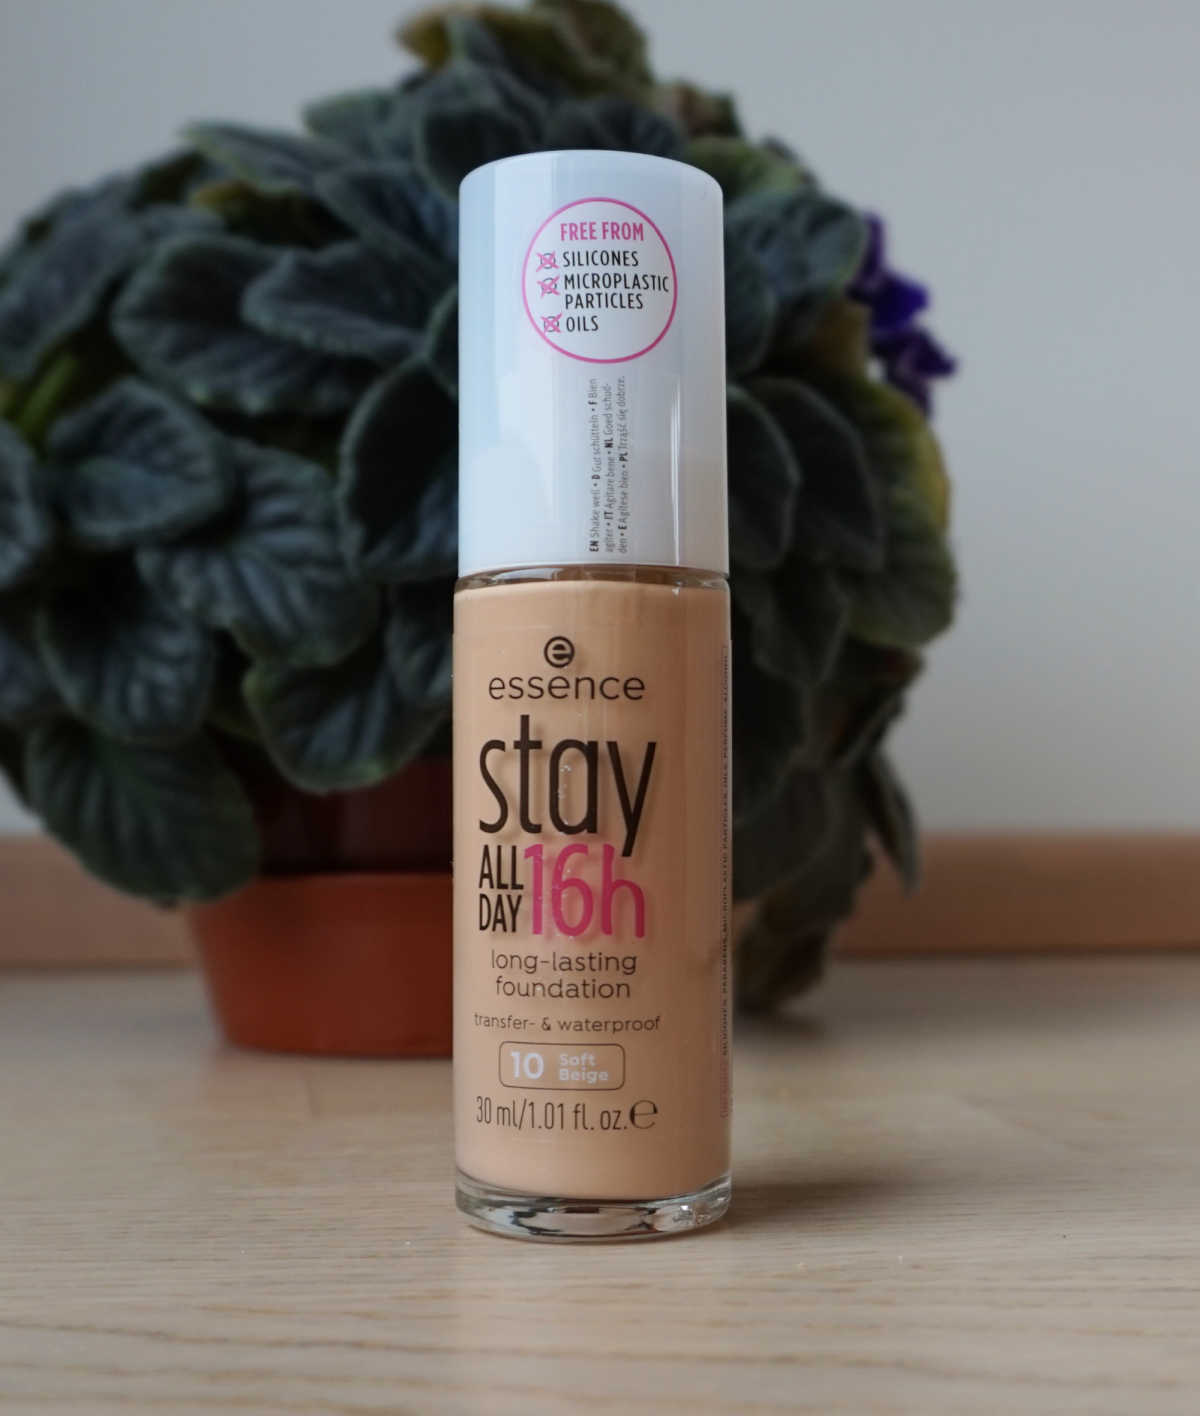 Essence Stay All Day 16H Long-Lasting Foundation in 10 Soft Beige